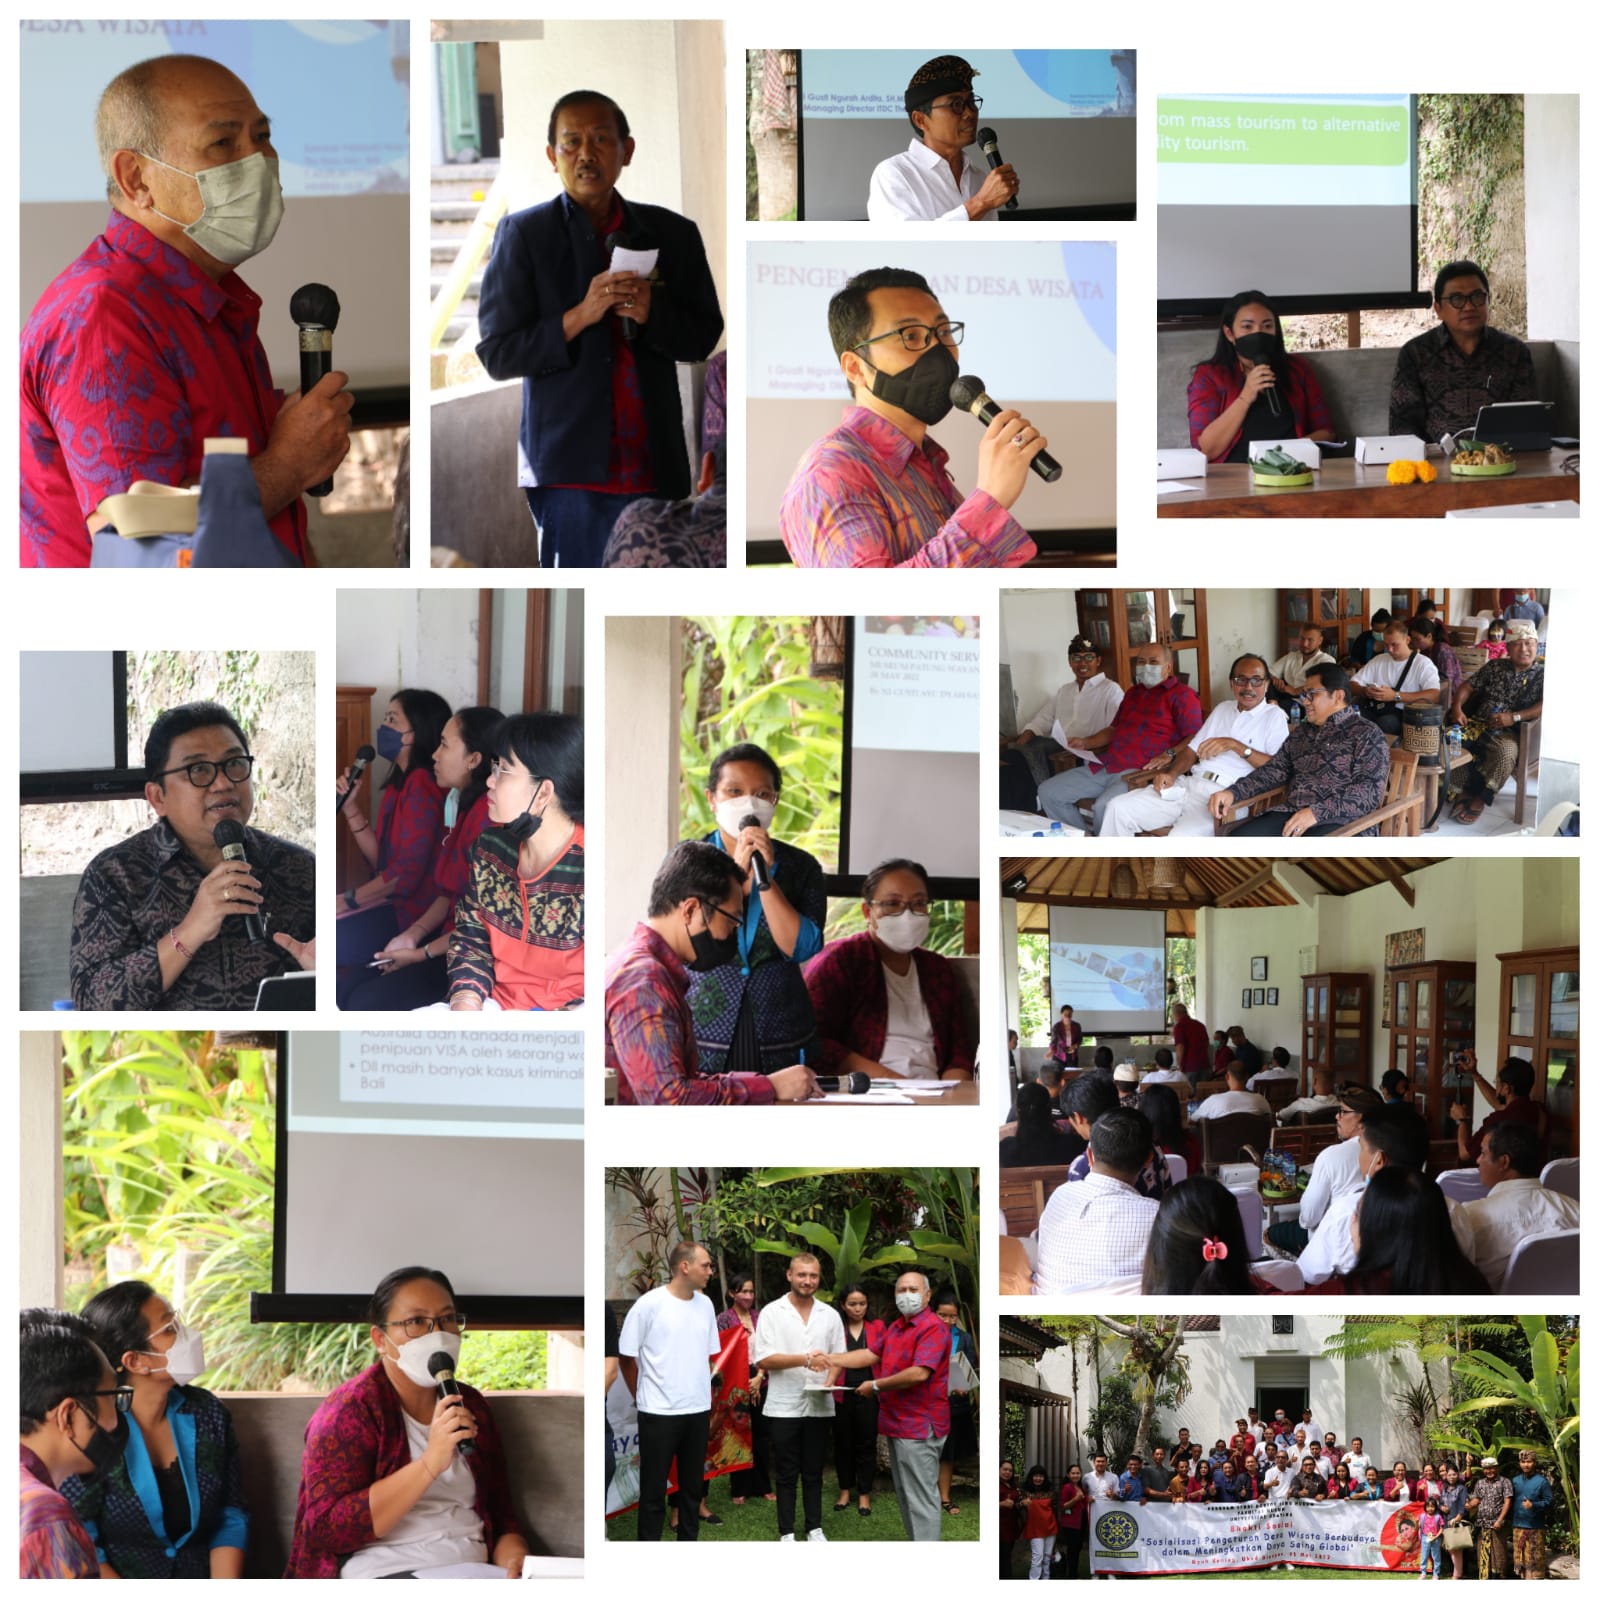 Doctoral Program of Law Faculty of Law UNUD Organizes Service to Stakeholders of Tourism Village at Pendet Museum of Nyuh Kuning Traditional Village (Ubud-Gianyar)